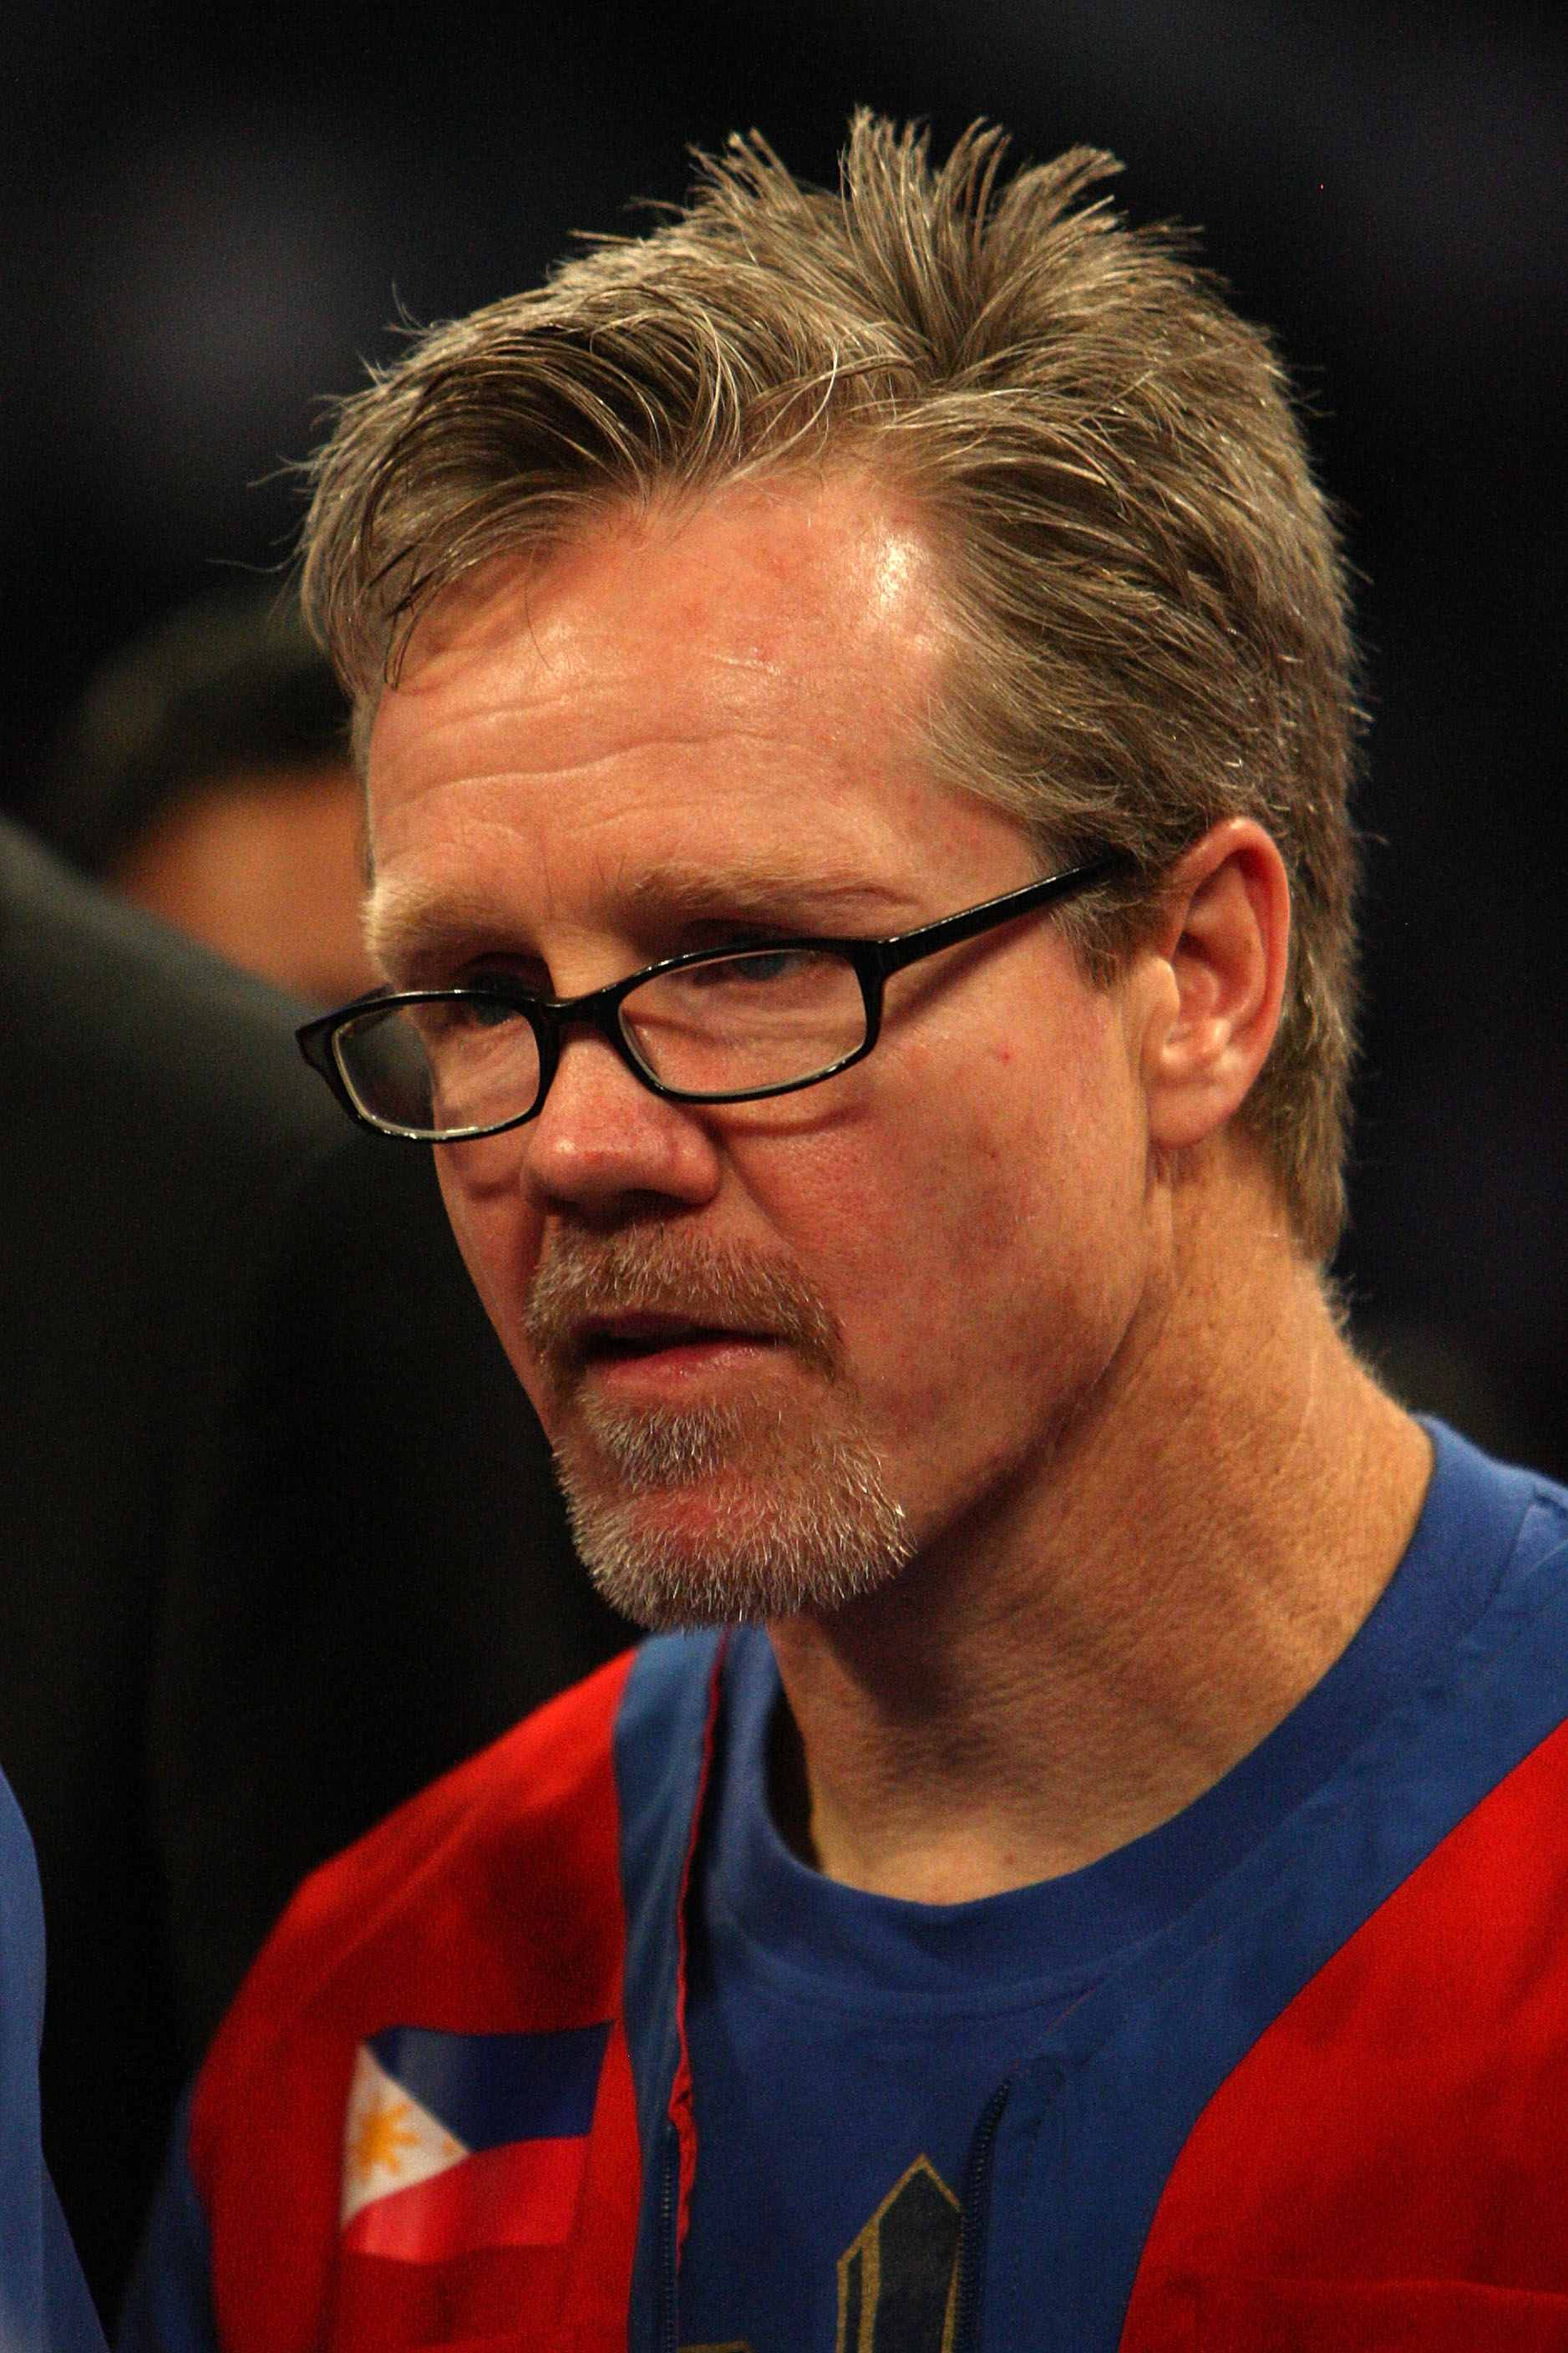 ARLINGTON, TX - MARCH 13:  Trainer Freddie Roach, who trains Manny Pacquiao of the Philippines, looks on in the ring after Pacquiao defeated Joshua Clottey of Ghana during the WBO welterweight title fight at Cowboys Stadium on March 13, 2010 in Arlington,